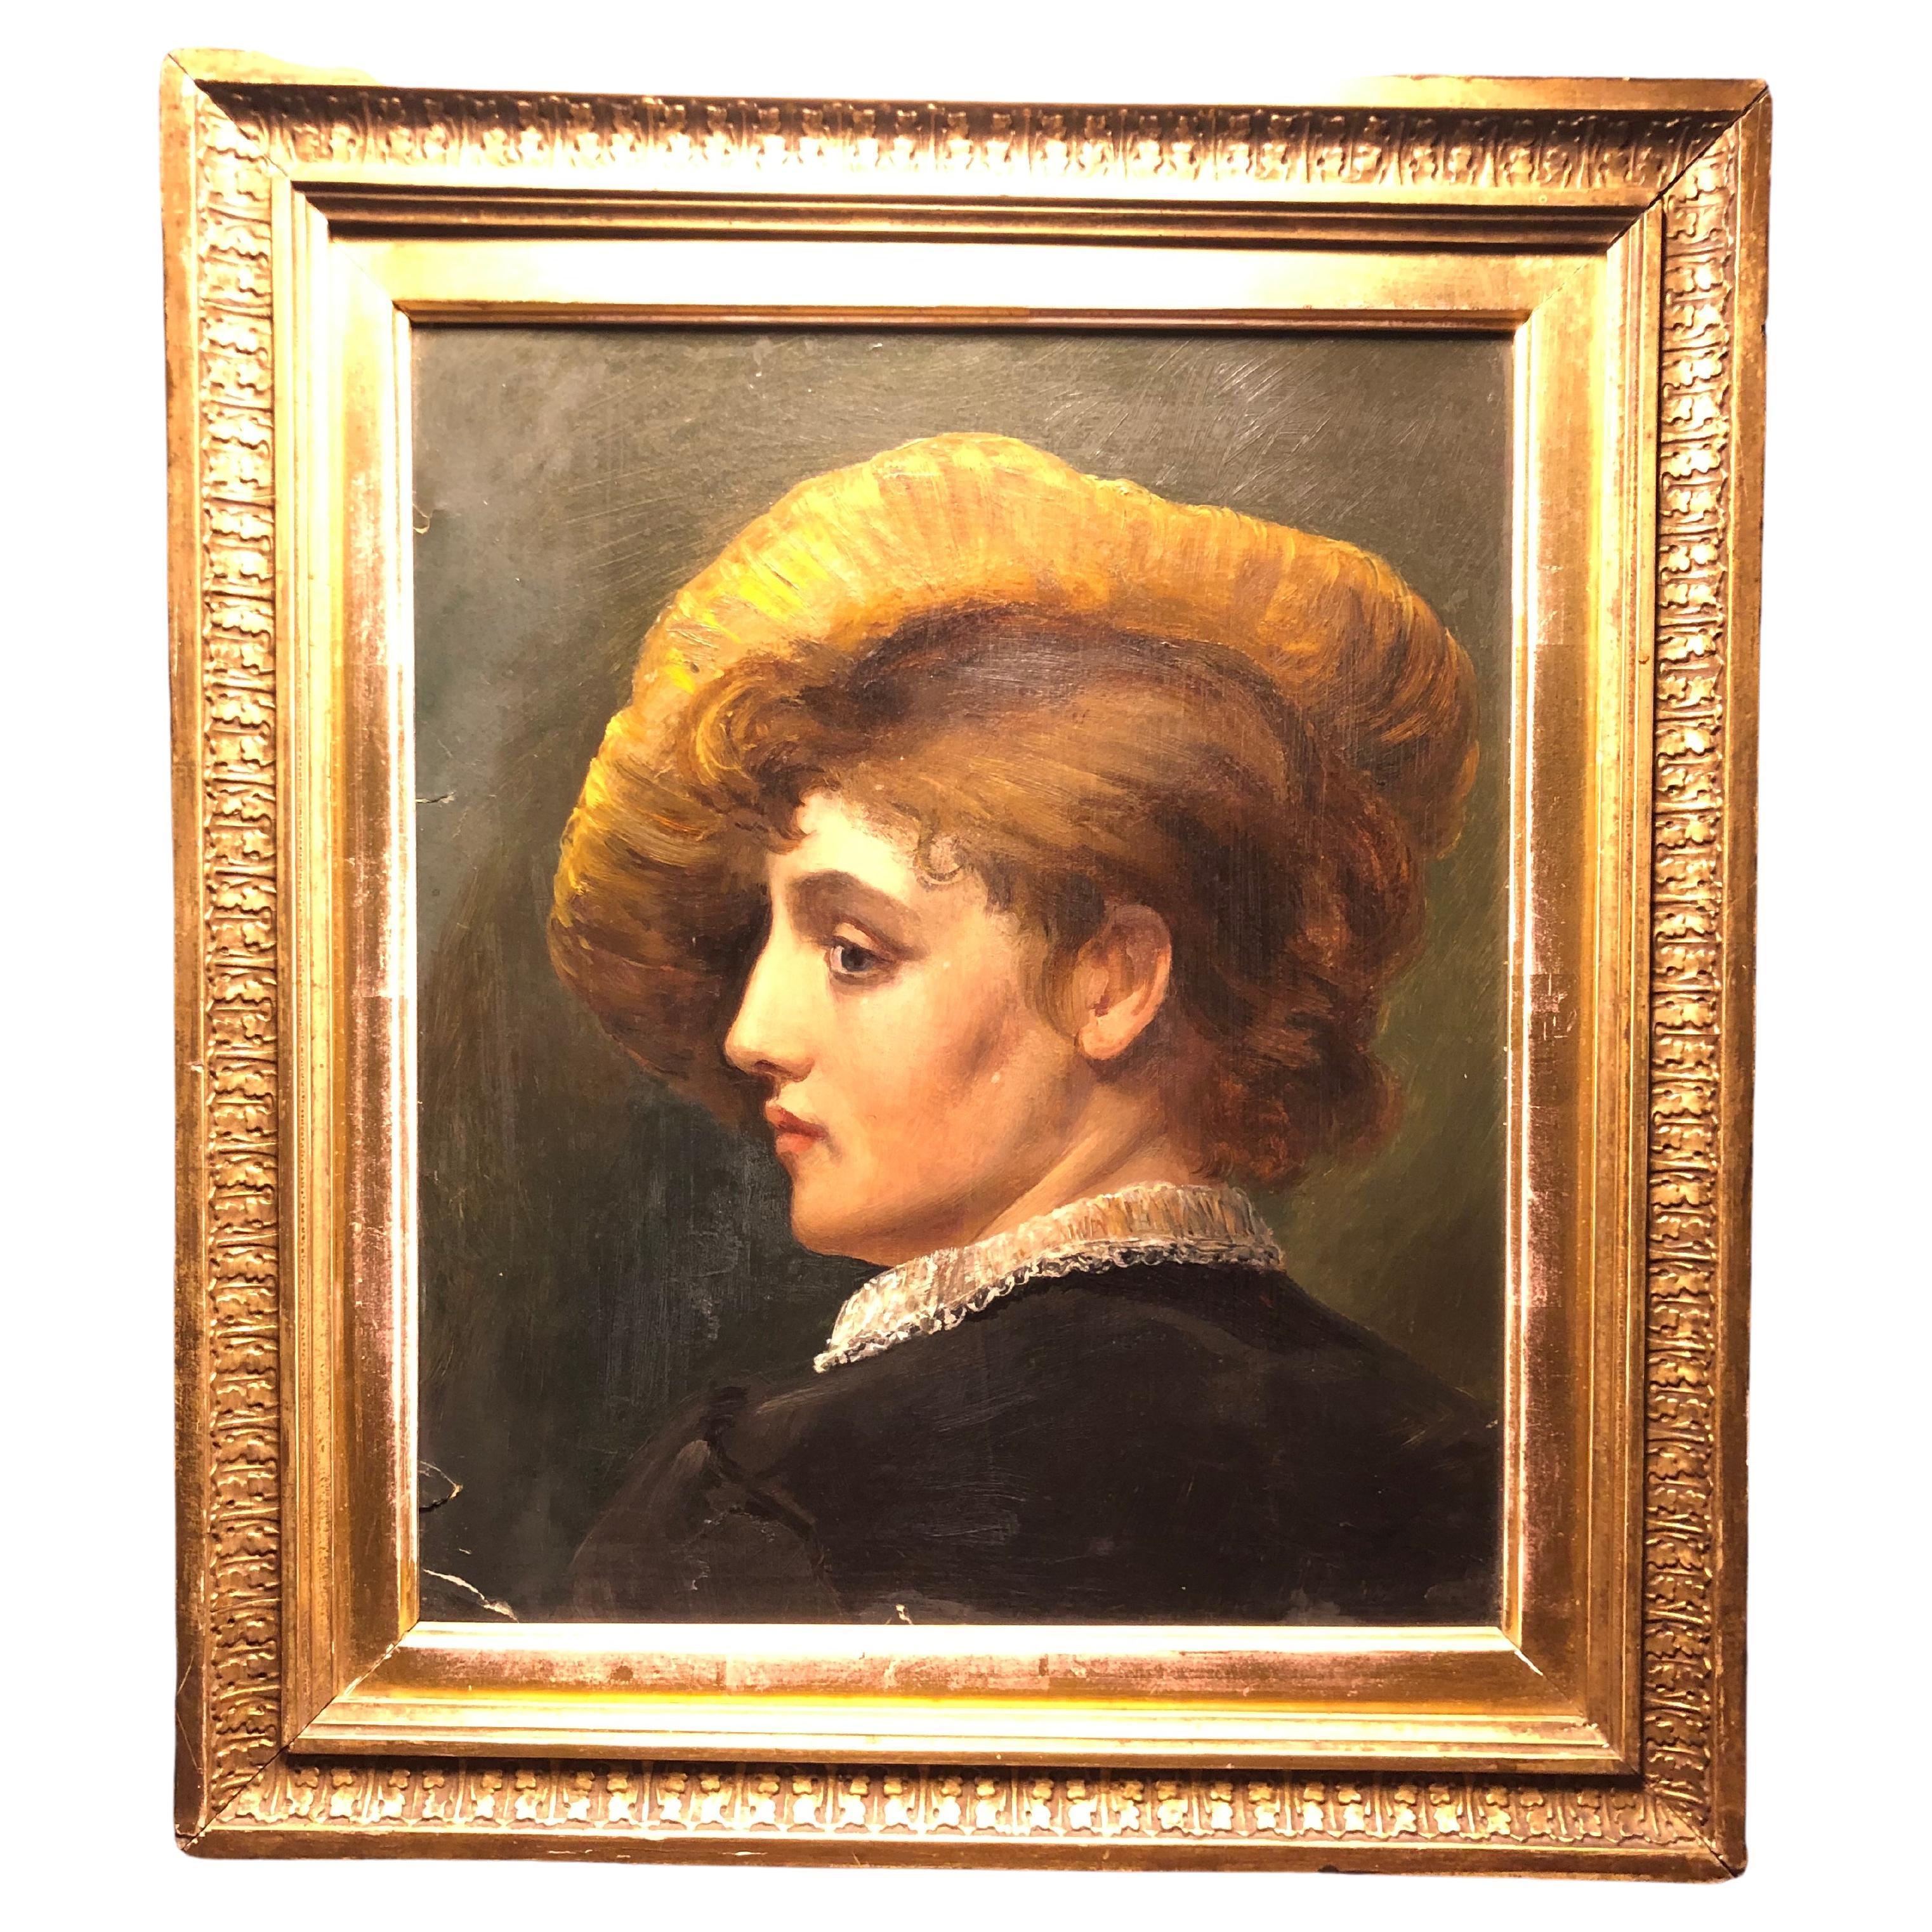 Strikingly Beautiful Antique Portrait of, Woman with a Hat